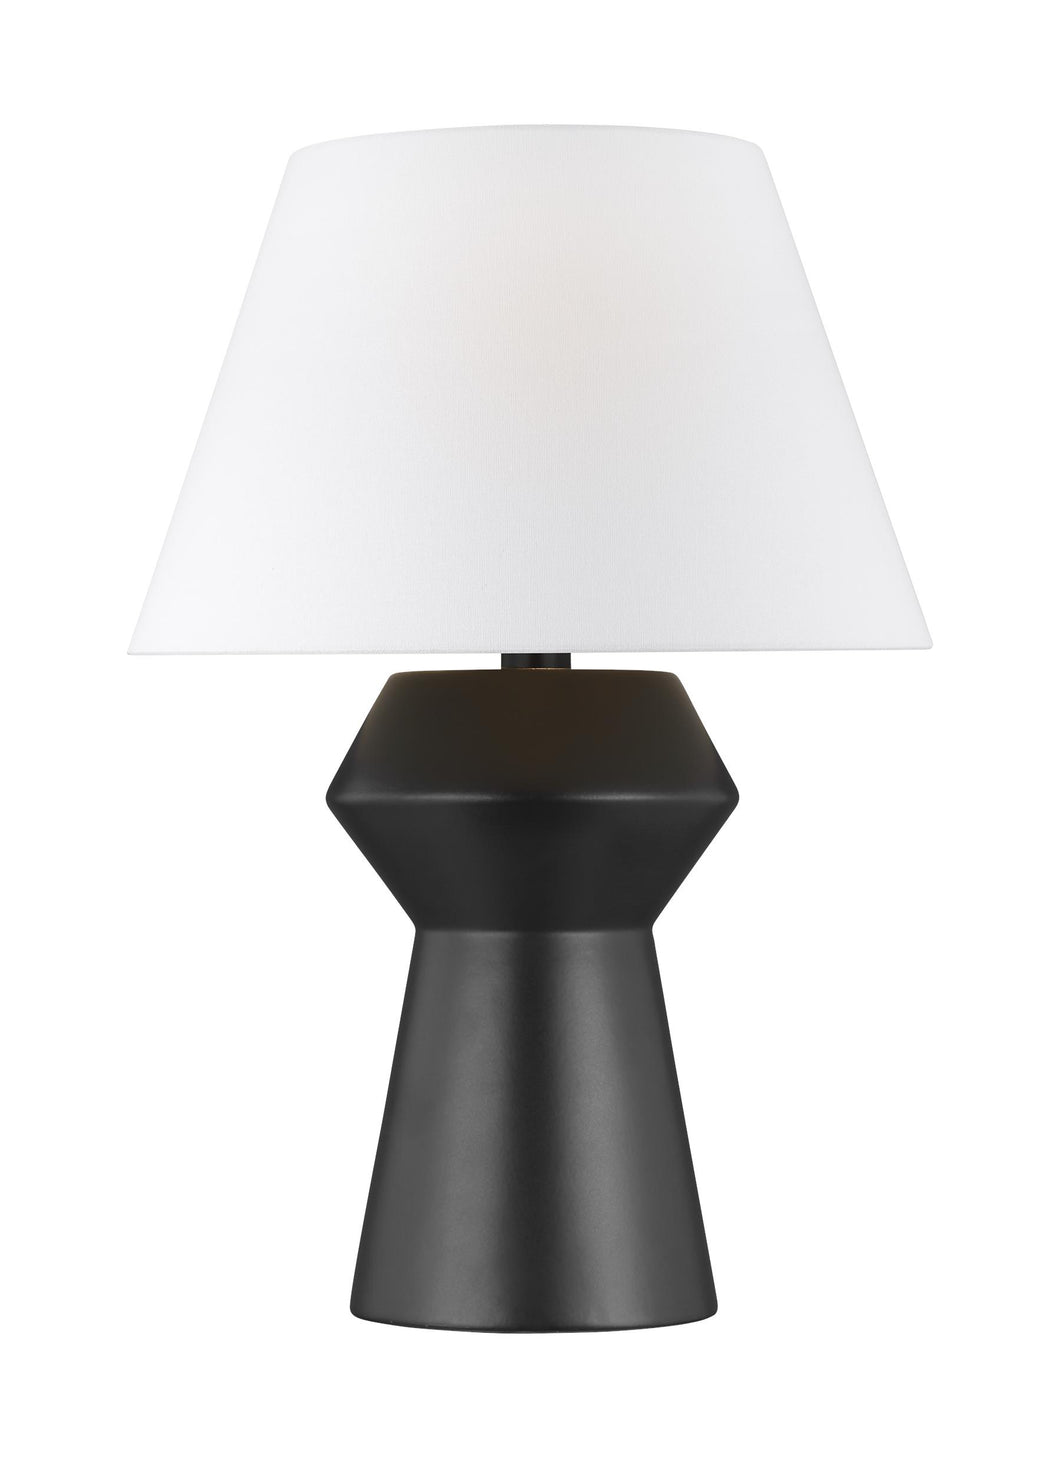 Abaco Inverted Table Lamp (3 Finishes)